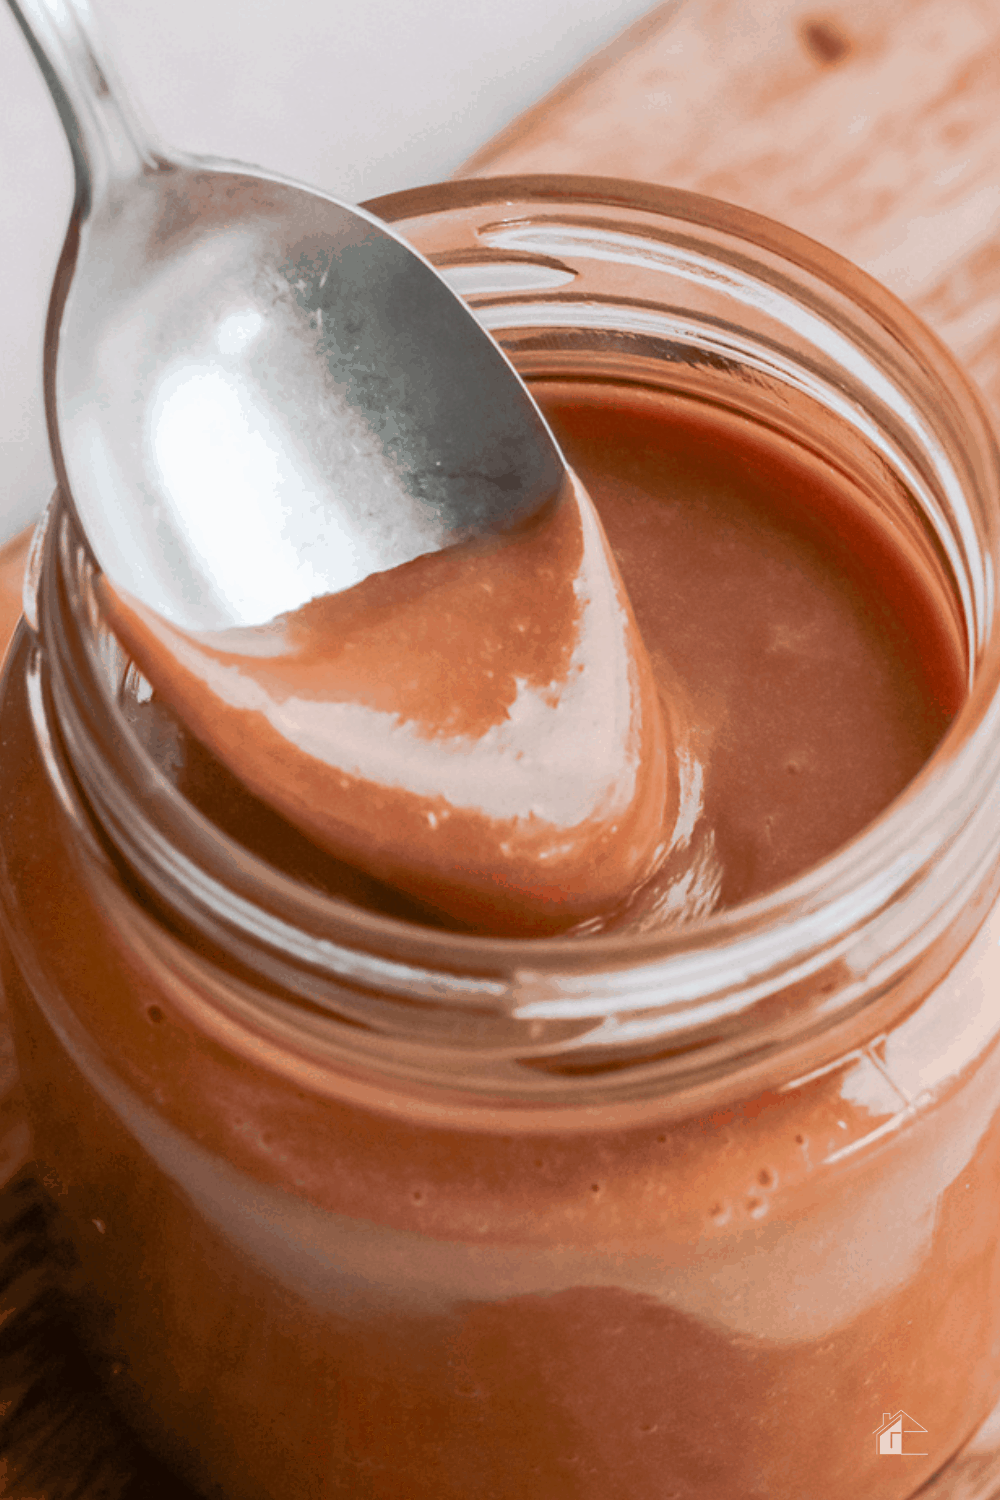 It’s sweet, creamy, and so delicious with a butterscotch-like flavor. This delightful Dulce de Leche can be a spread, fillings, toppings, or dip. via @mystayathome